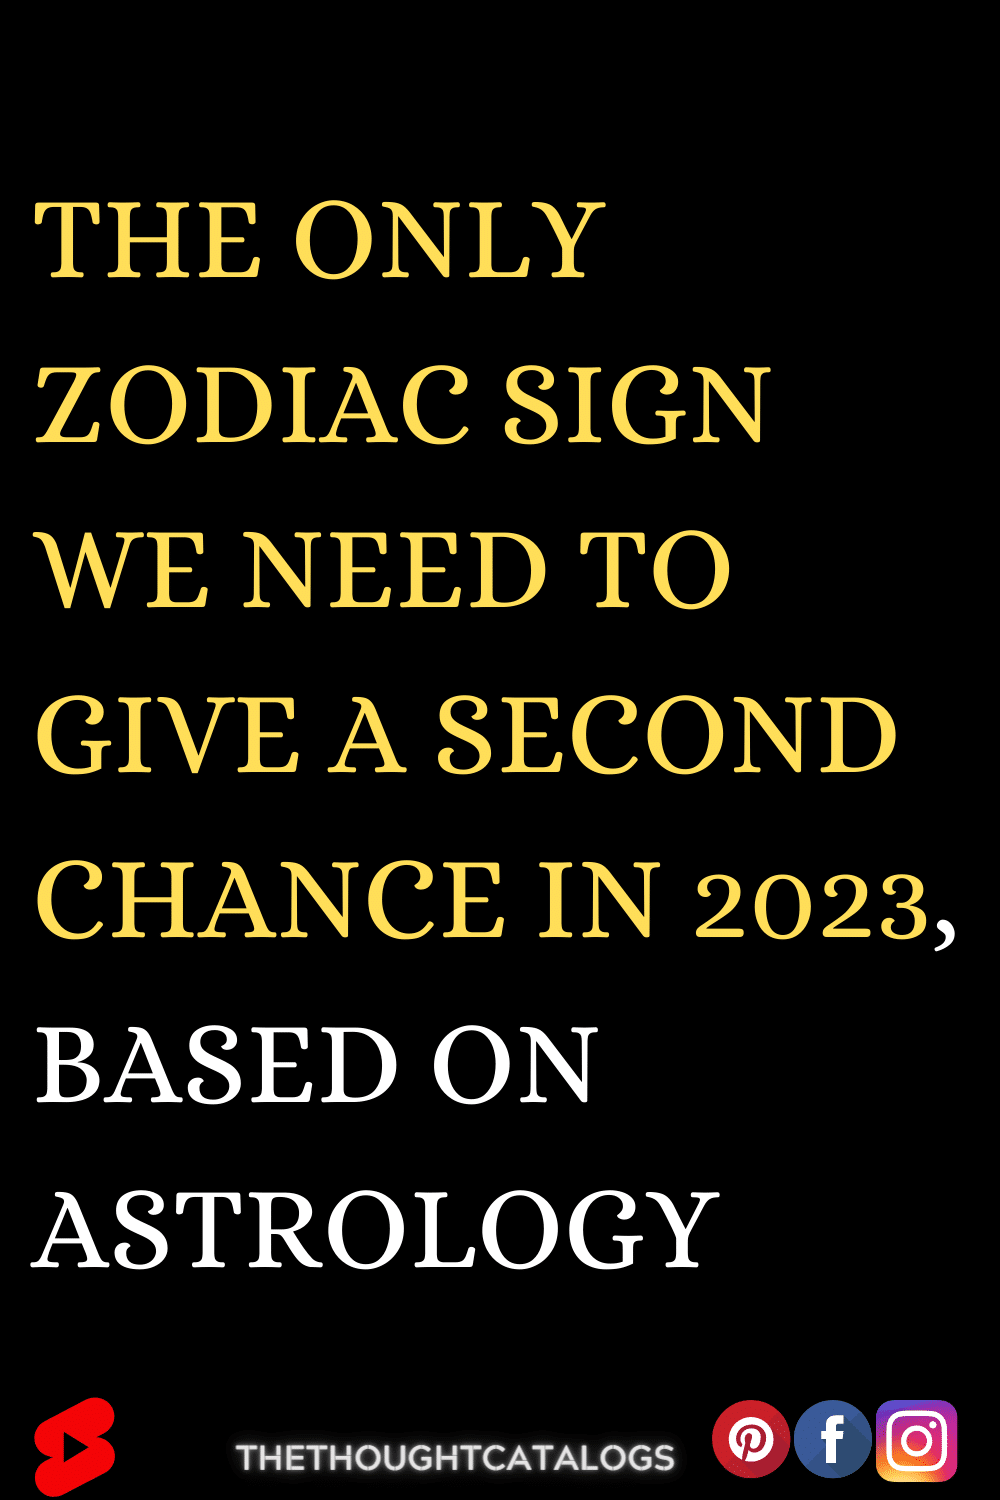 The Only Zodiac Sign We Need To Give A Second Chance To, Based On Astrology